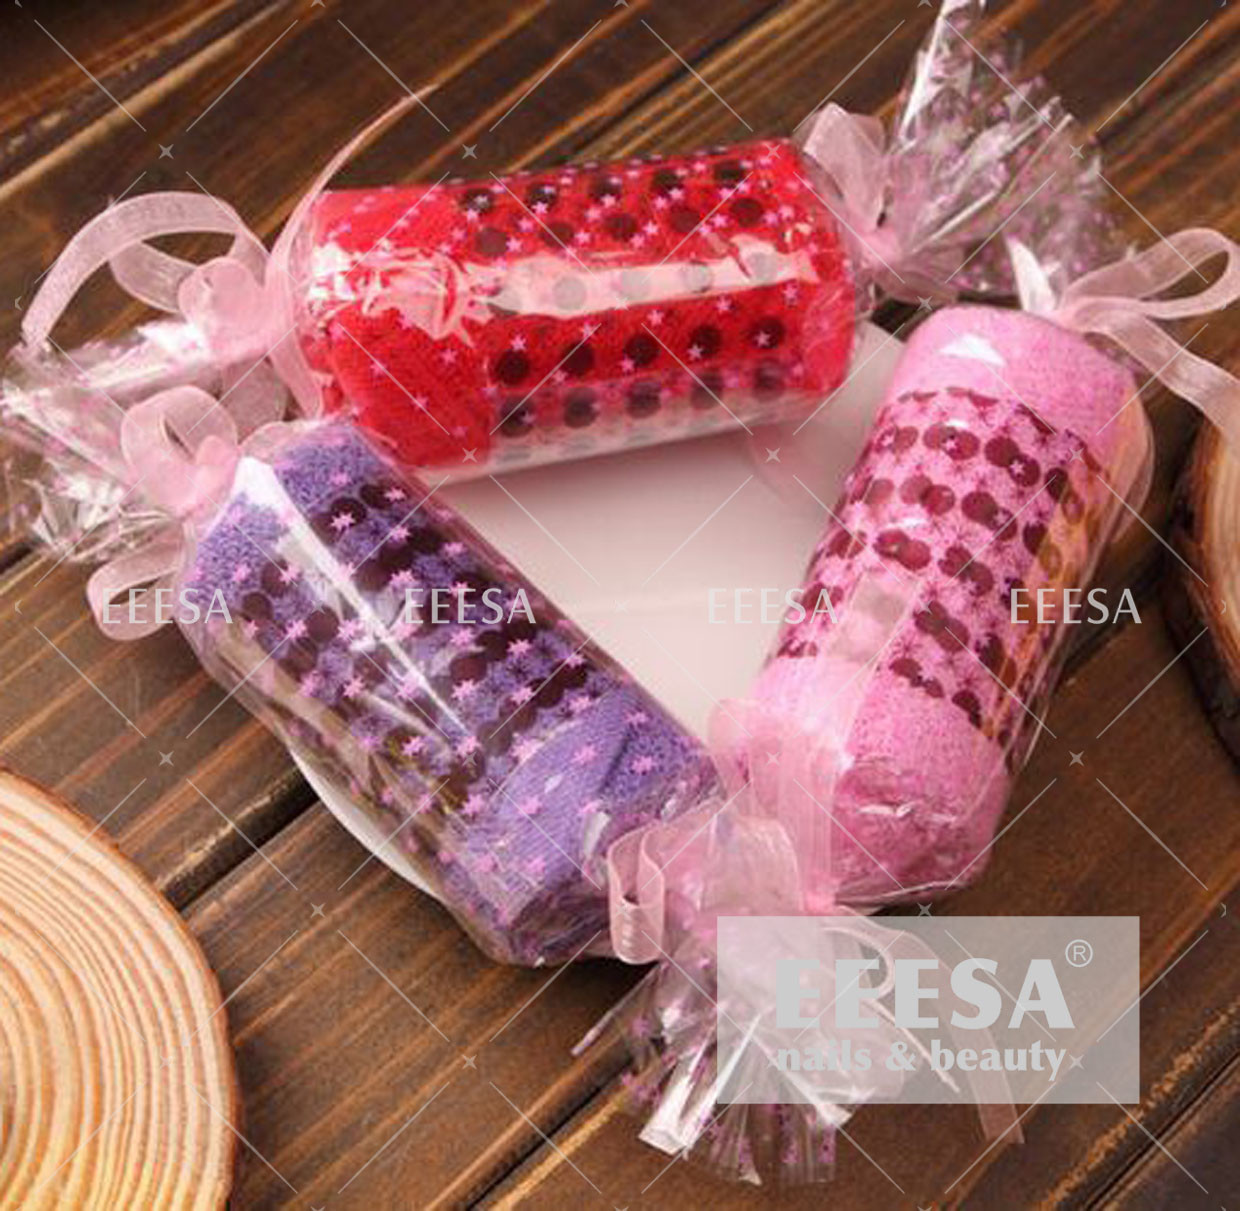 Buy cheap 100% Cotton Festival Wed Present Souvenirs Candy Wedding Gift Favors Towel from wholesalers